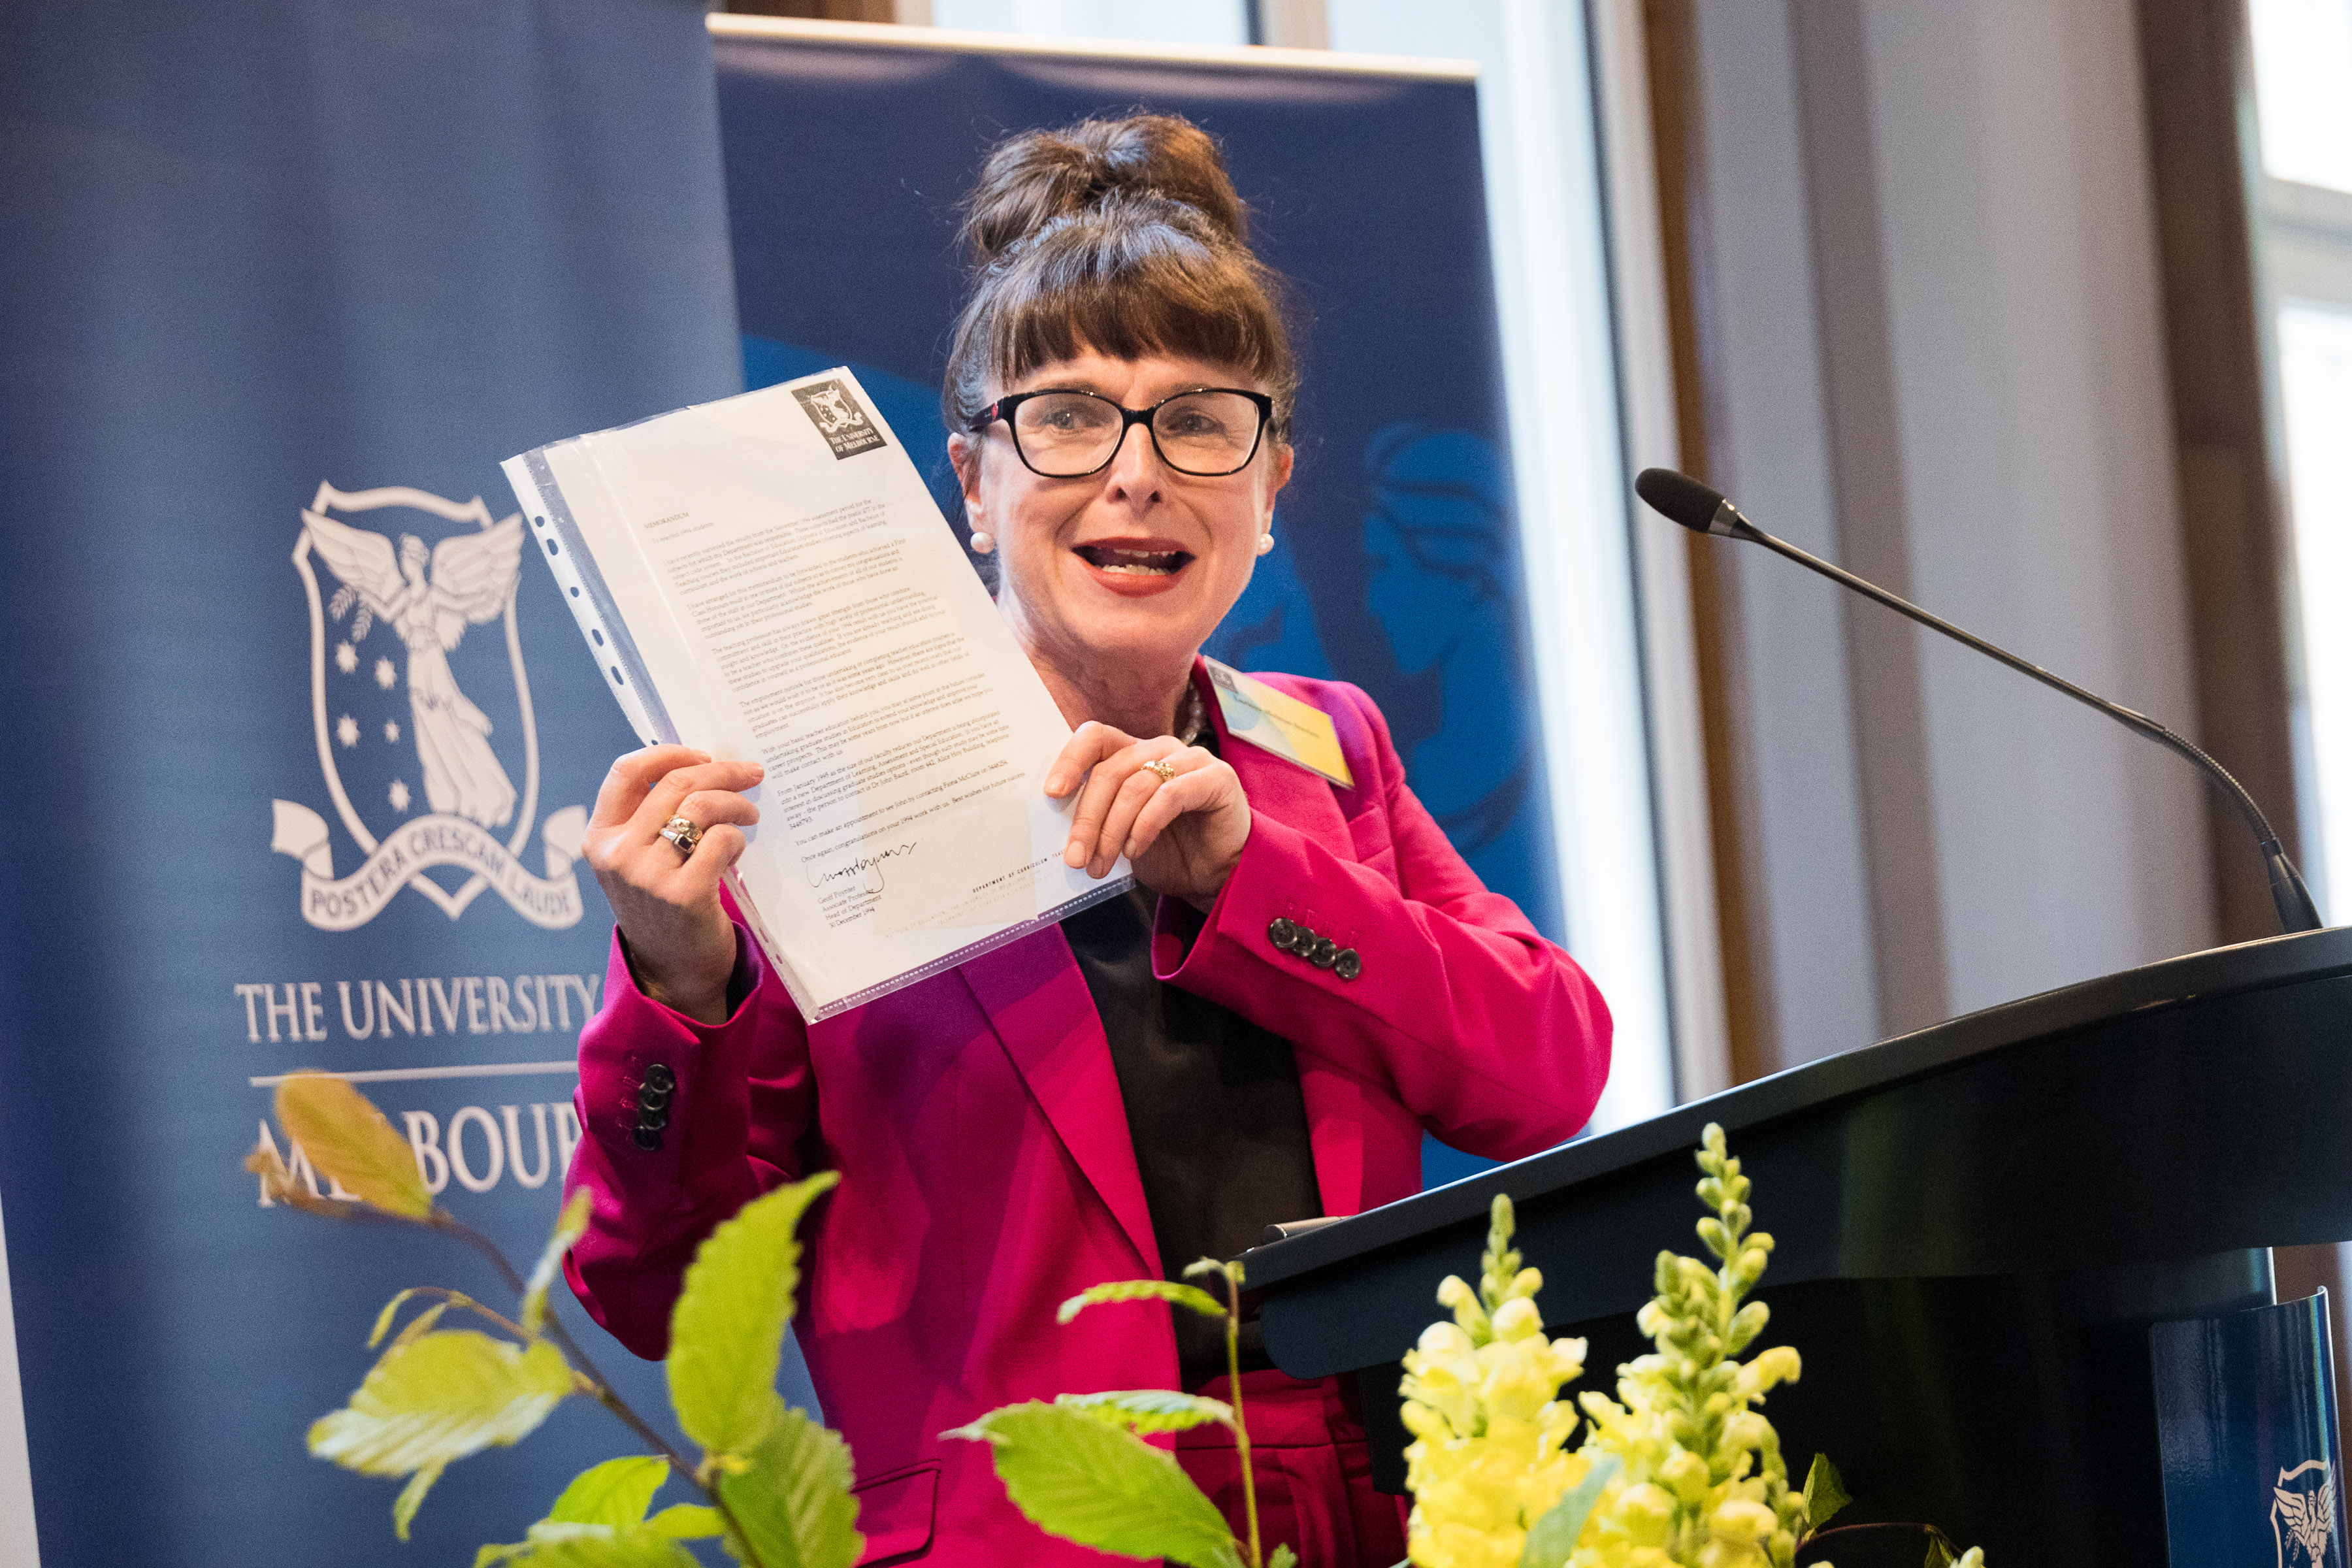 Deputy Dean, Professor Larissa McLean Davies, presenting her letter from 1994, informing her there are currently no jobs for teachers. Photo: Peter Casemento.